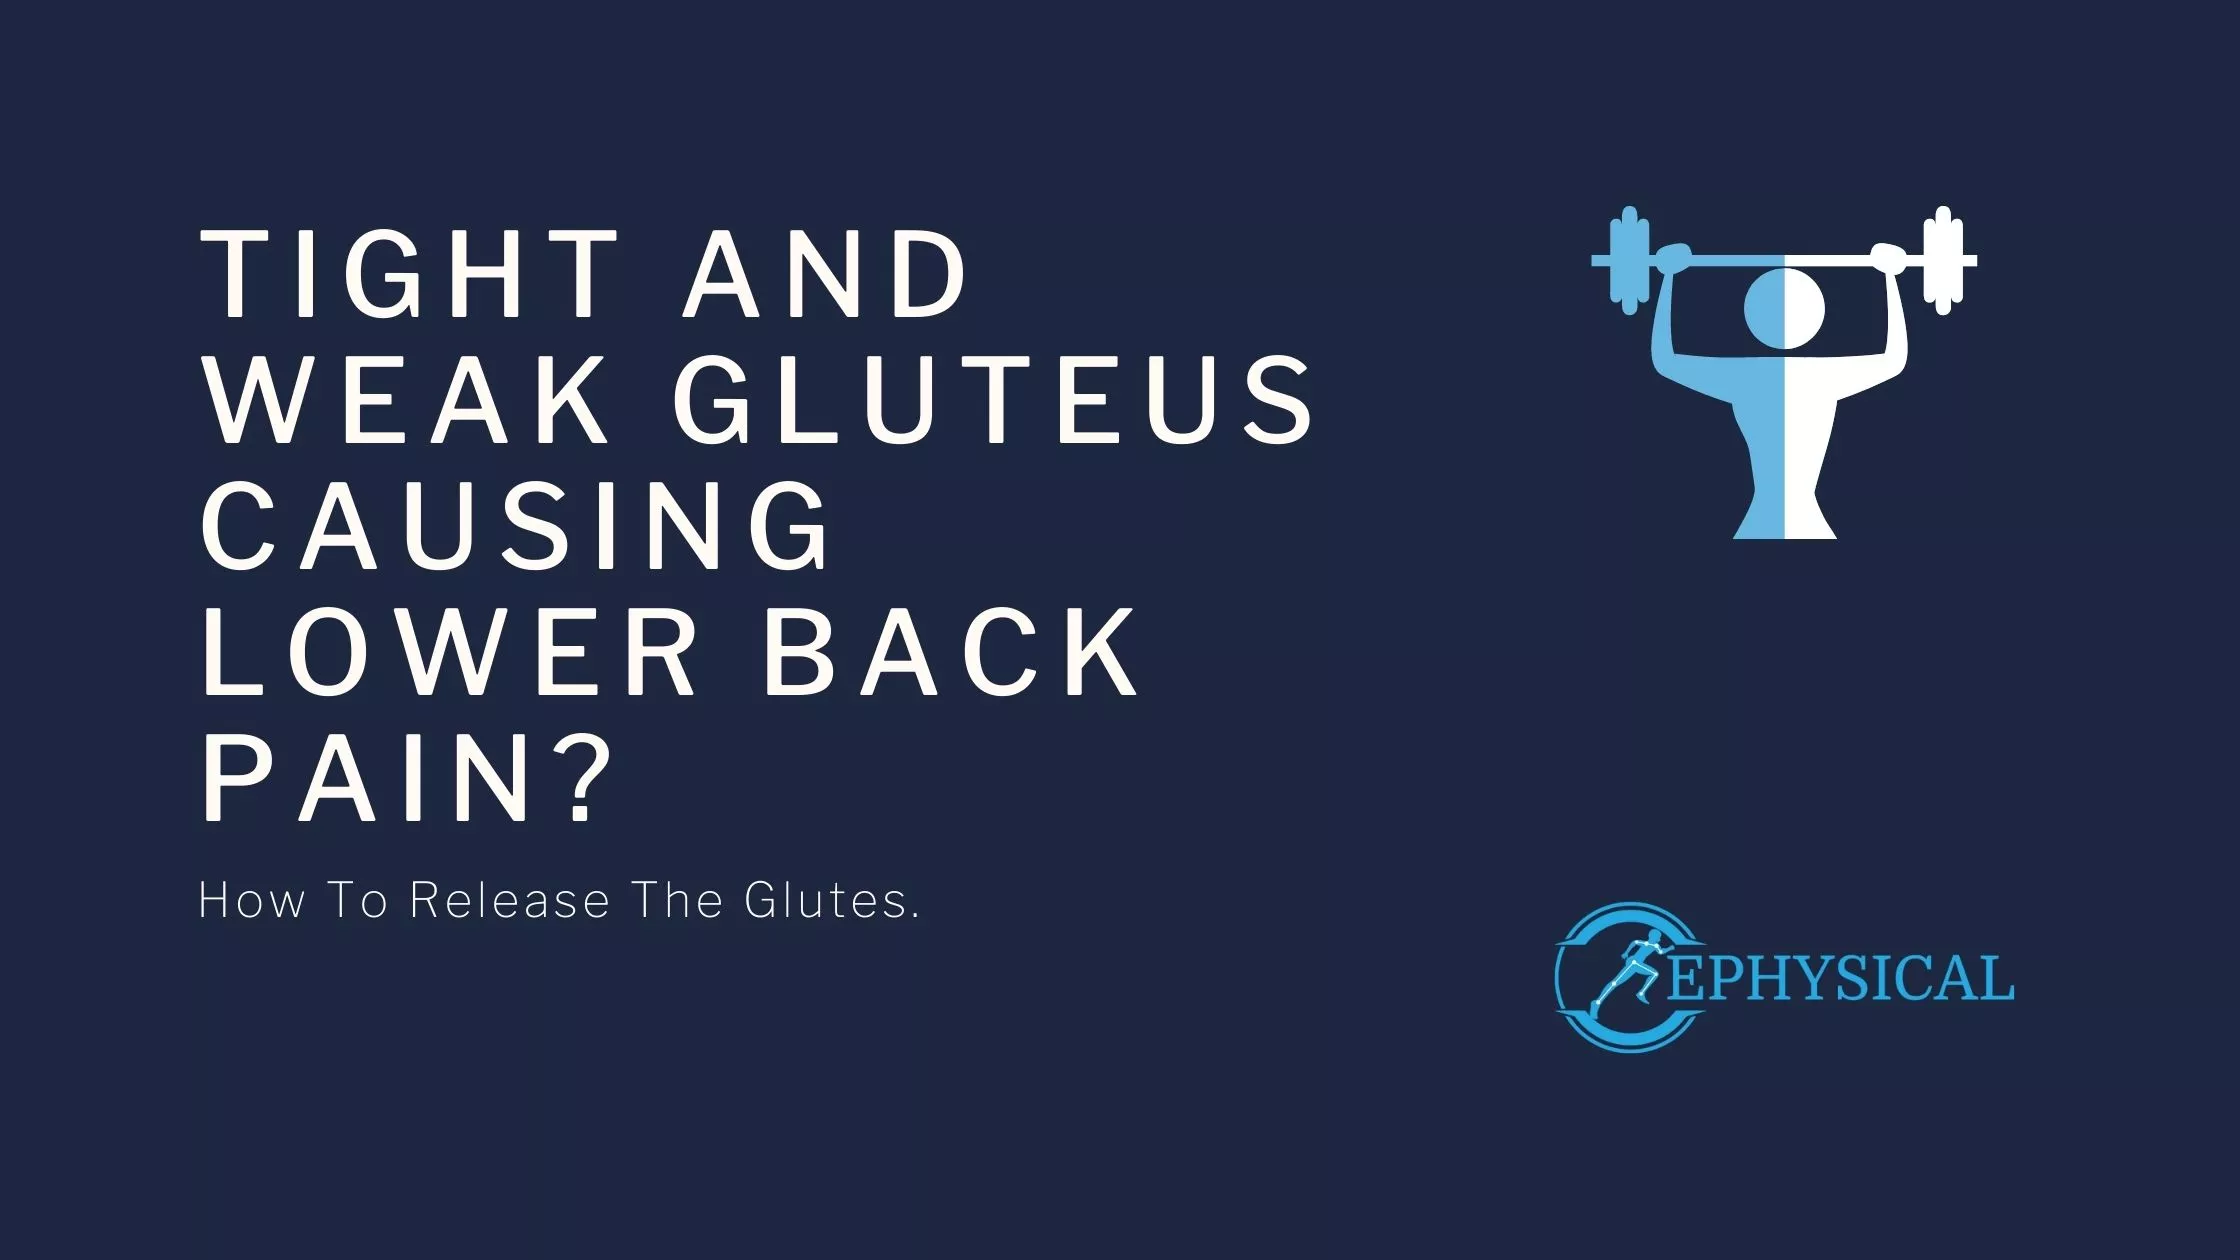 Tight and weak glutes causing lower back pain